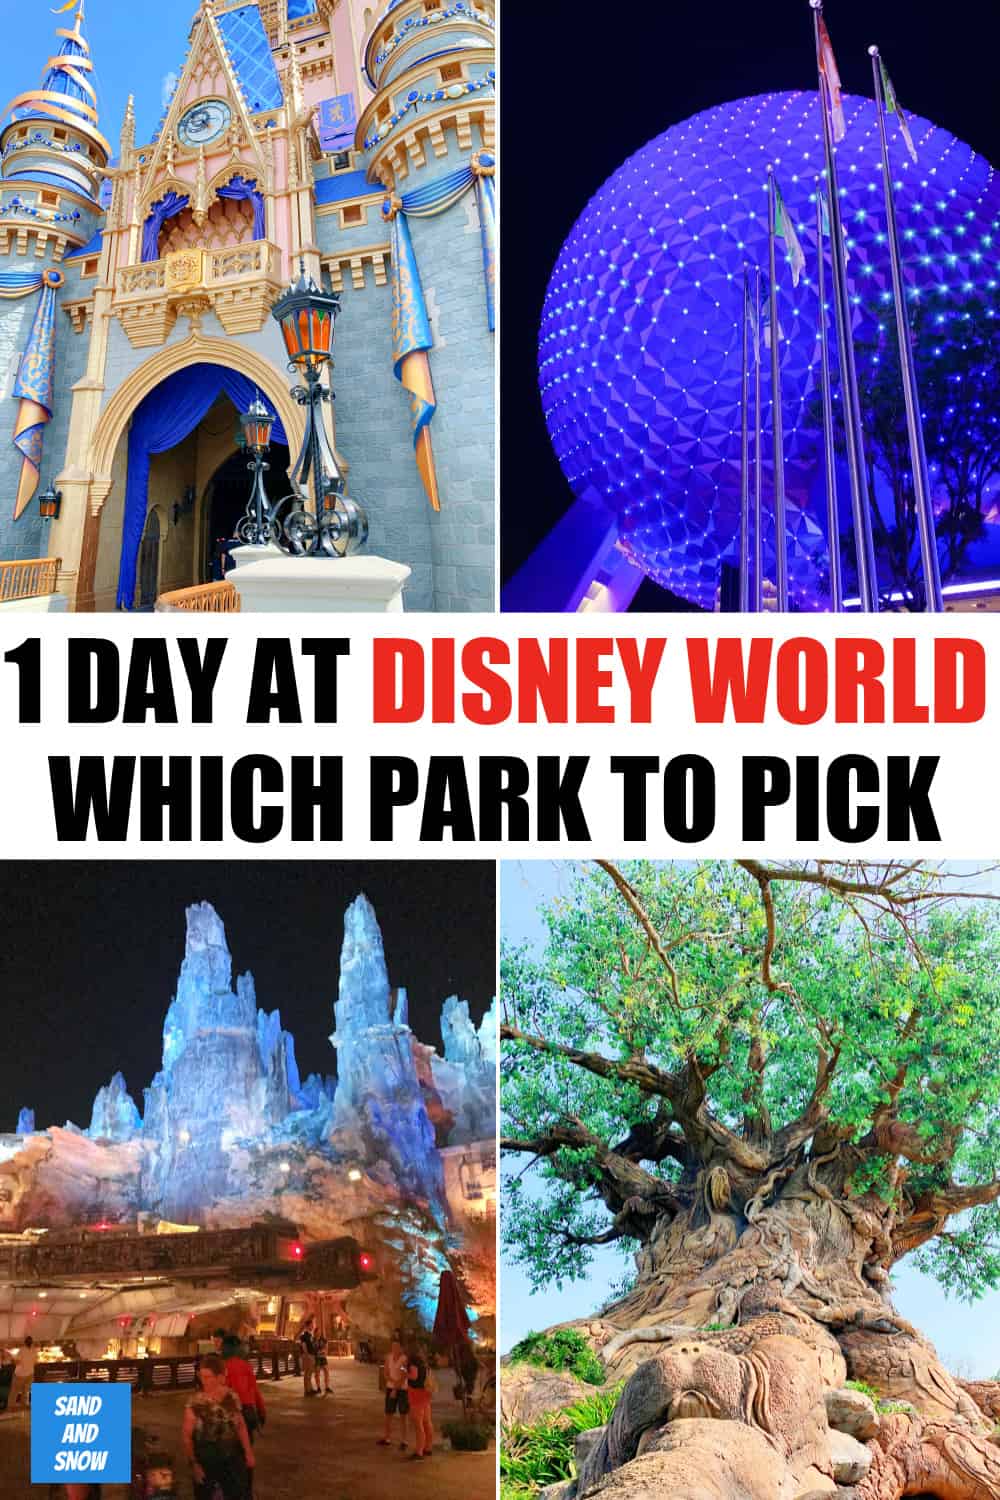 Only have one day to spend at Disney World and not sure which park to choose? From which park is best for families, to nostalgia, to thrill rides, here's everything you need to help you pick. #DisneyWorld #WDW #DisneyParks #DisneyPlanning #familytravel